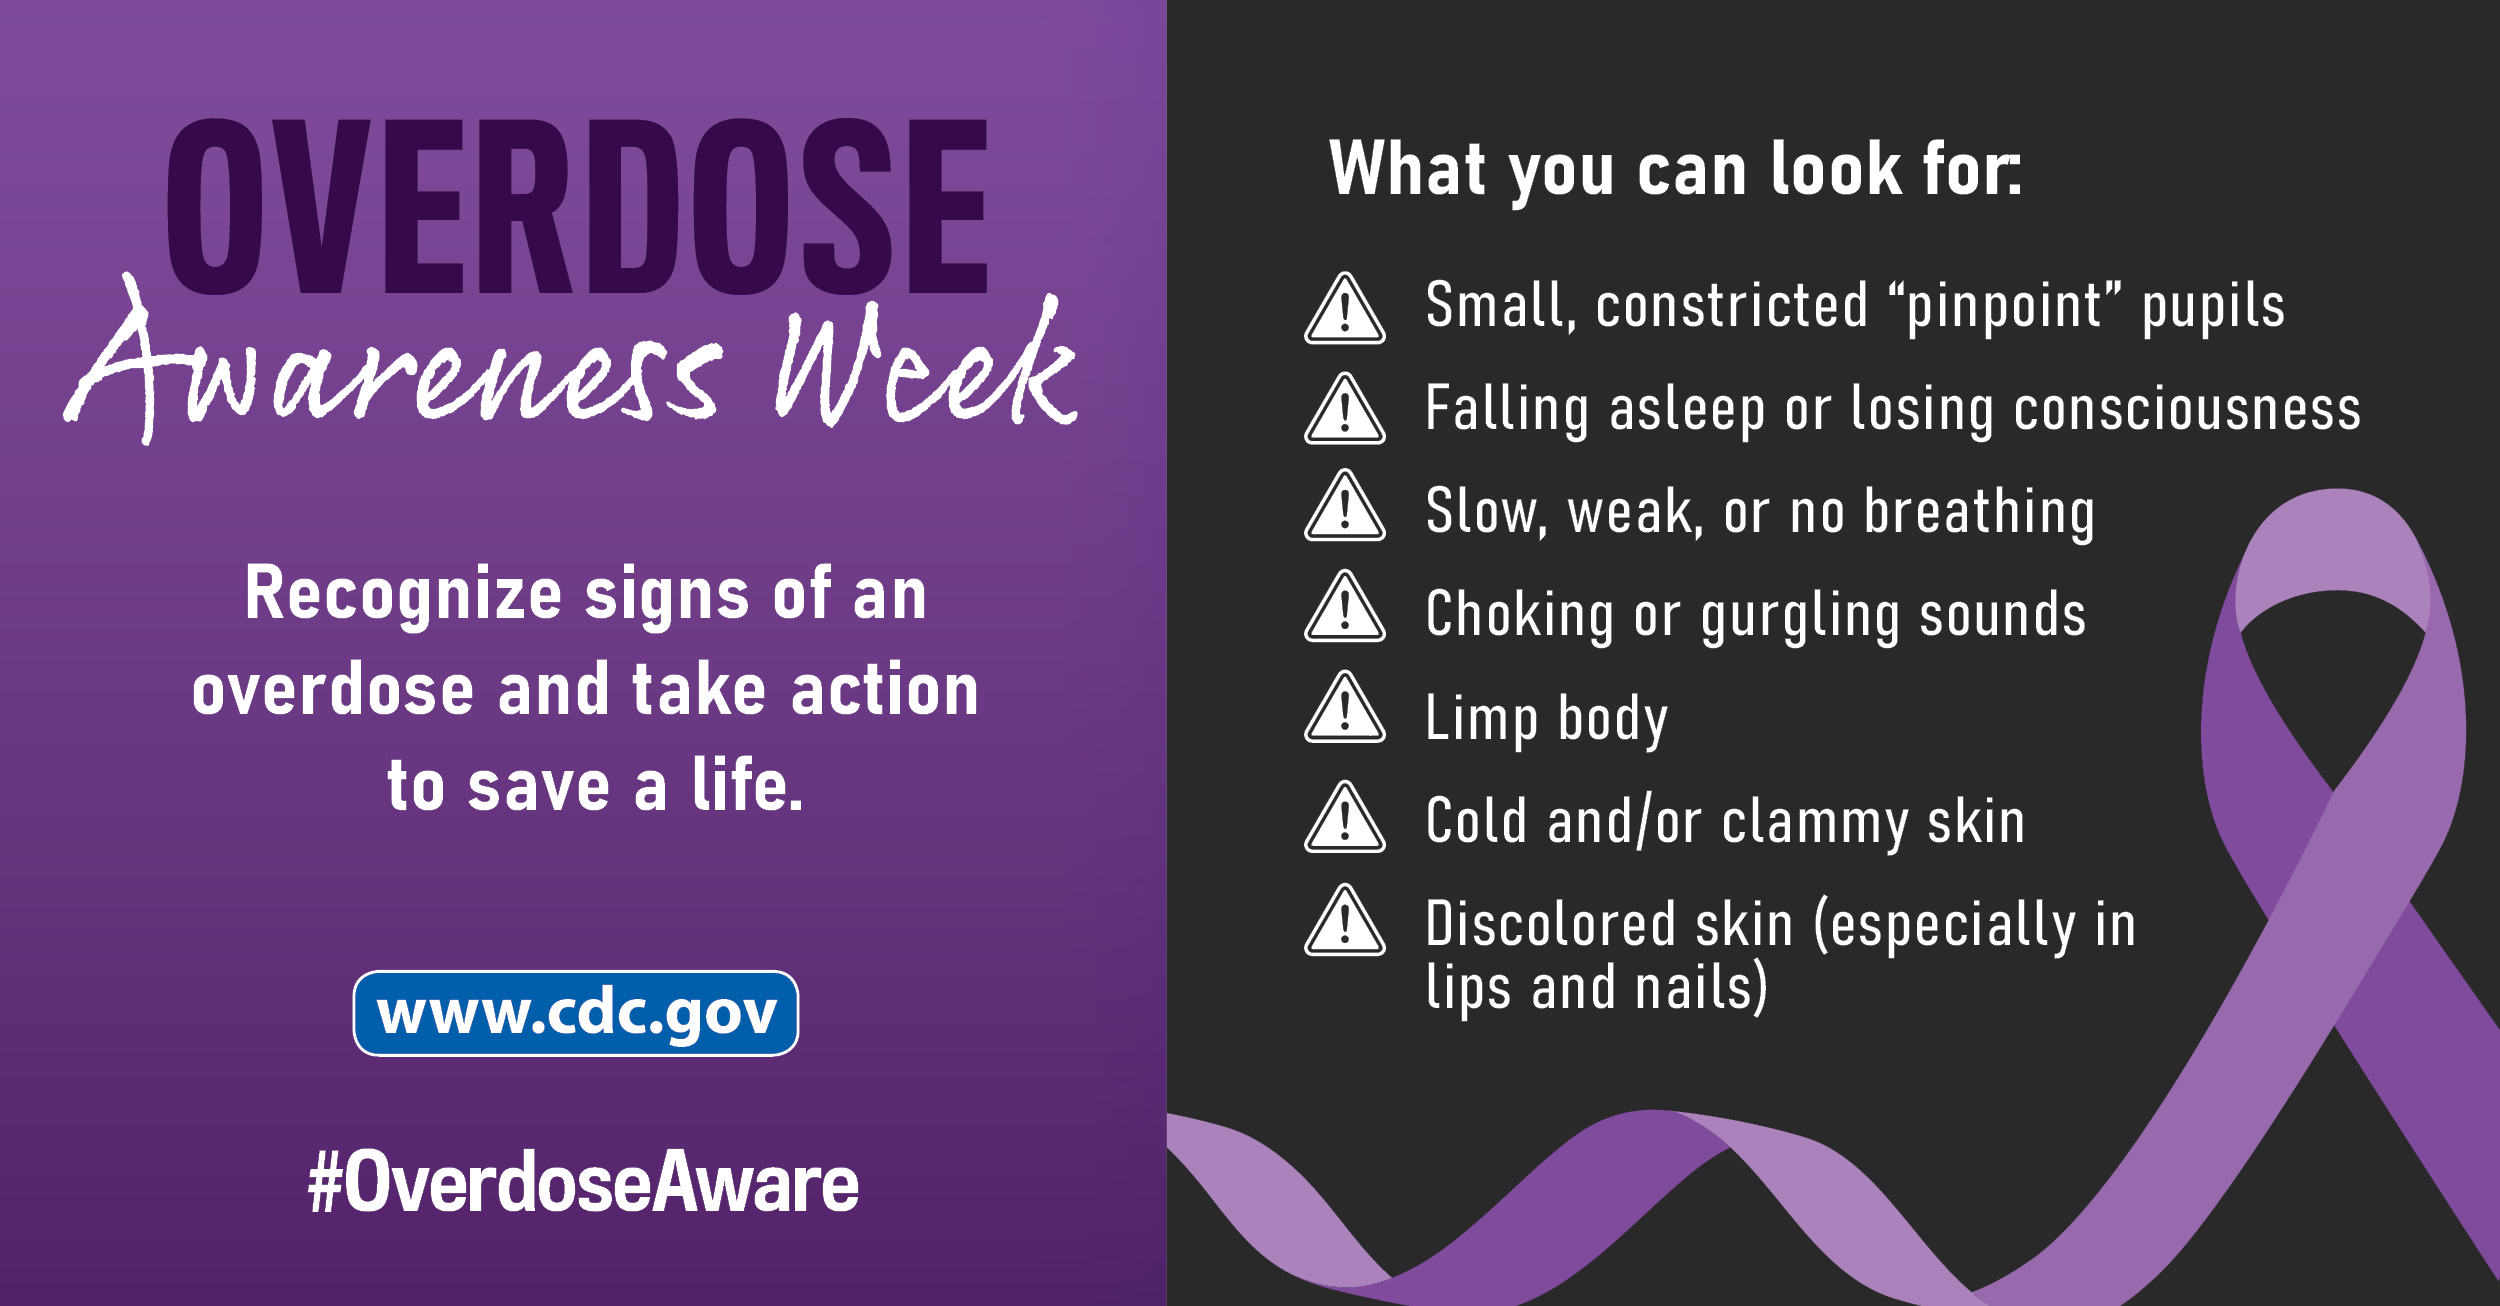 August 31 - International Overdose Awareness Day: Take Action. Learn the signs of an overdose.